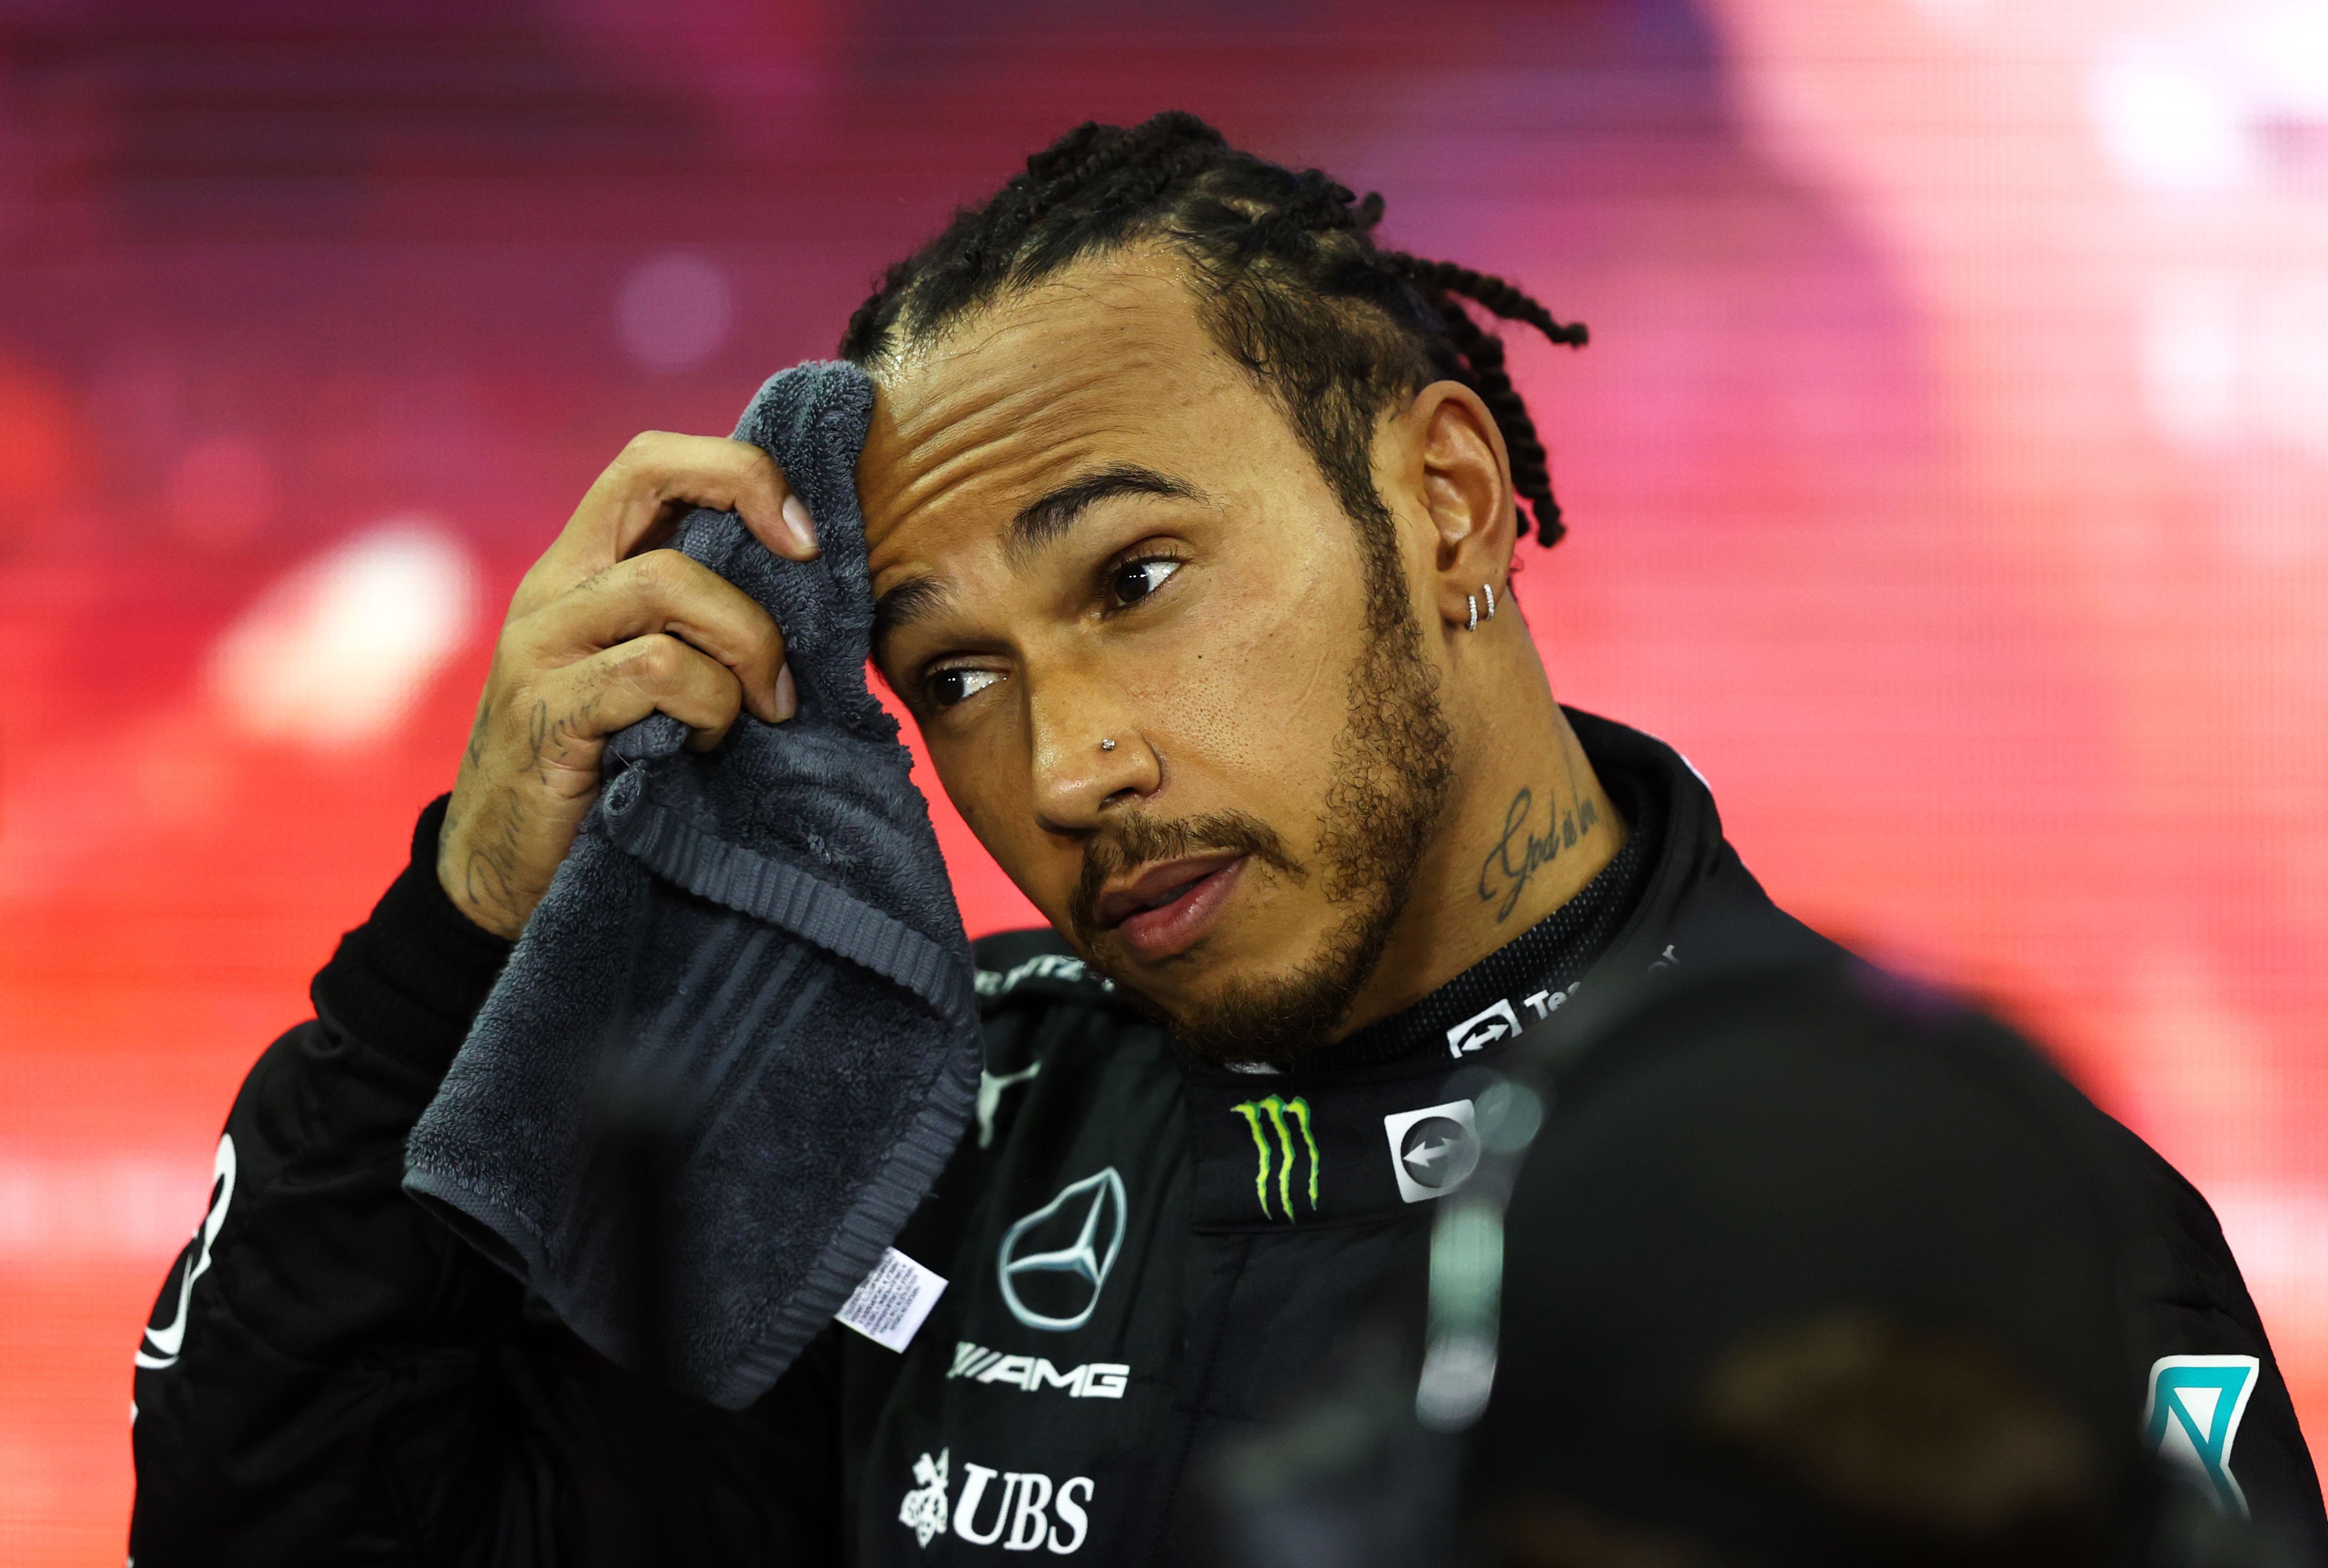 Lewis Hamilton says his 'worst fears came alive' after Abu Dhabi Grand Prix  title race against Max Verstappen